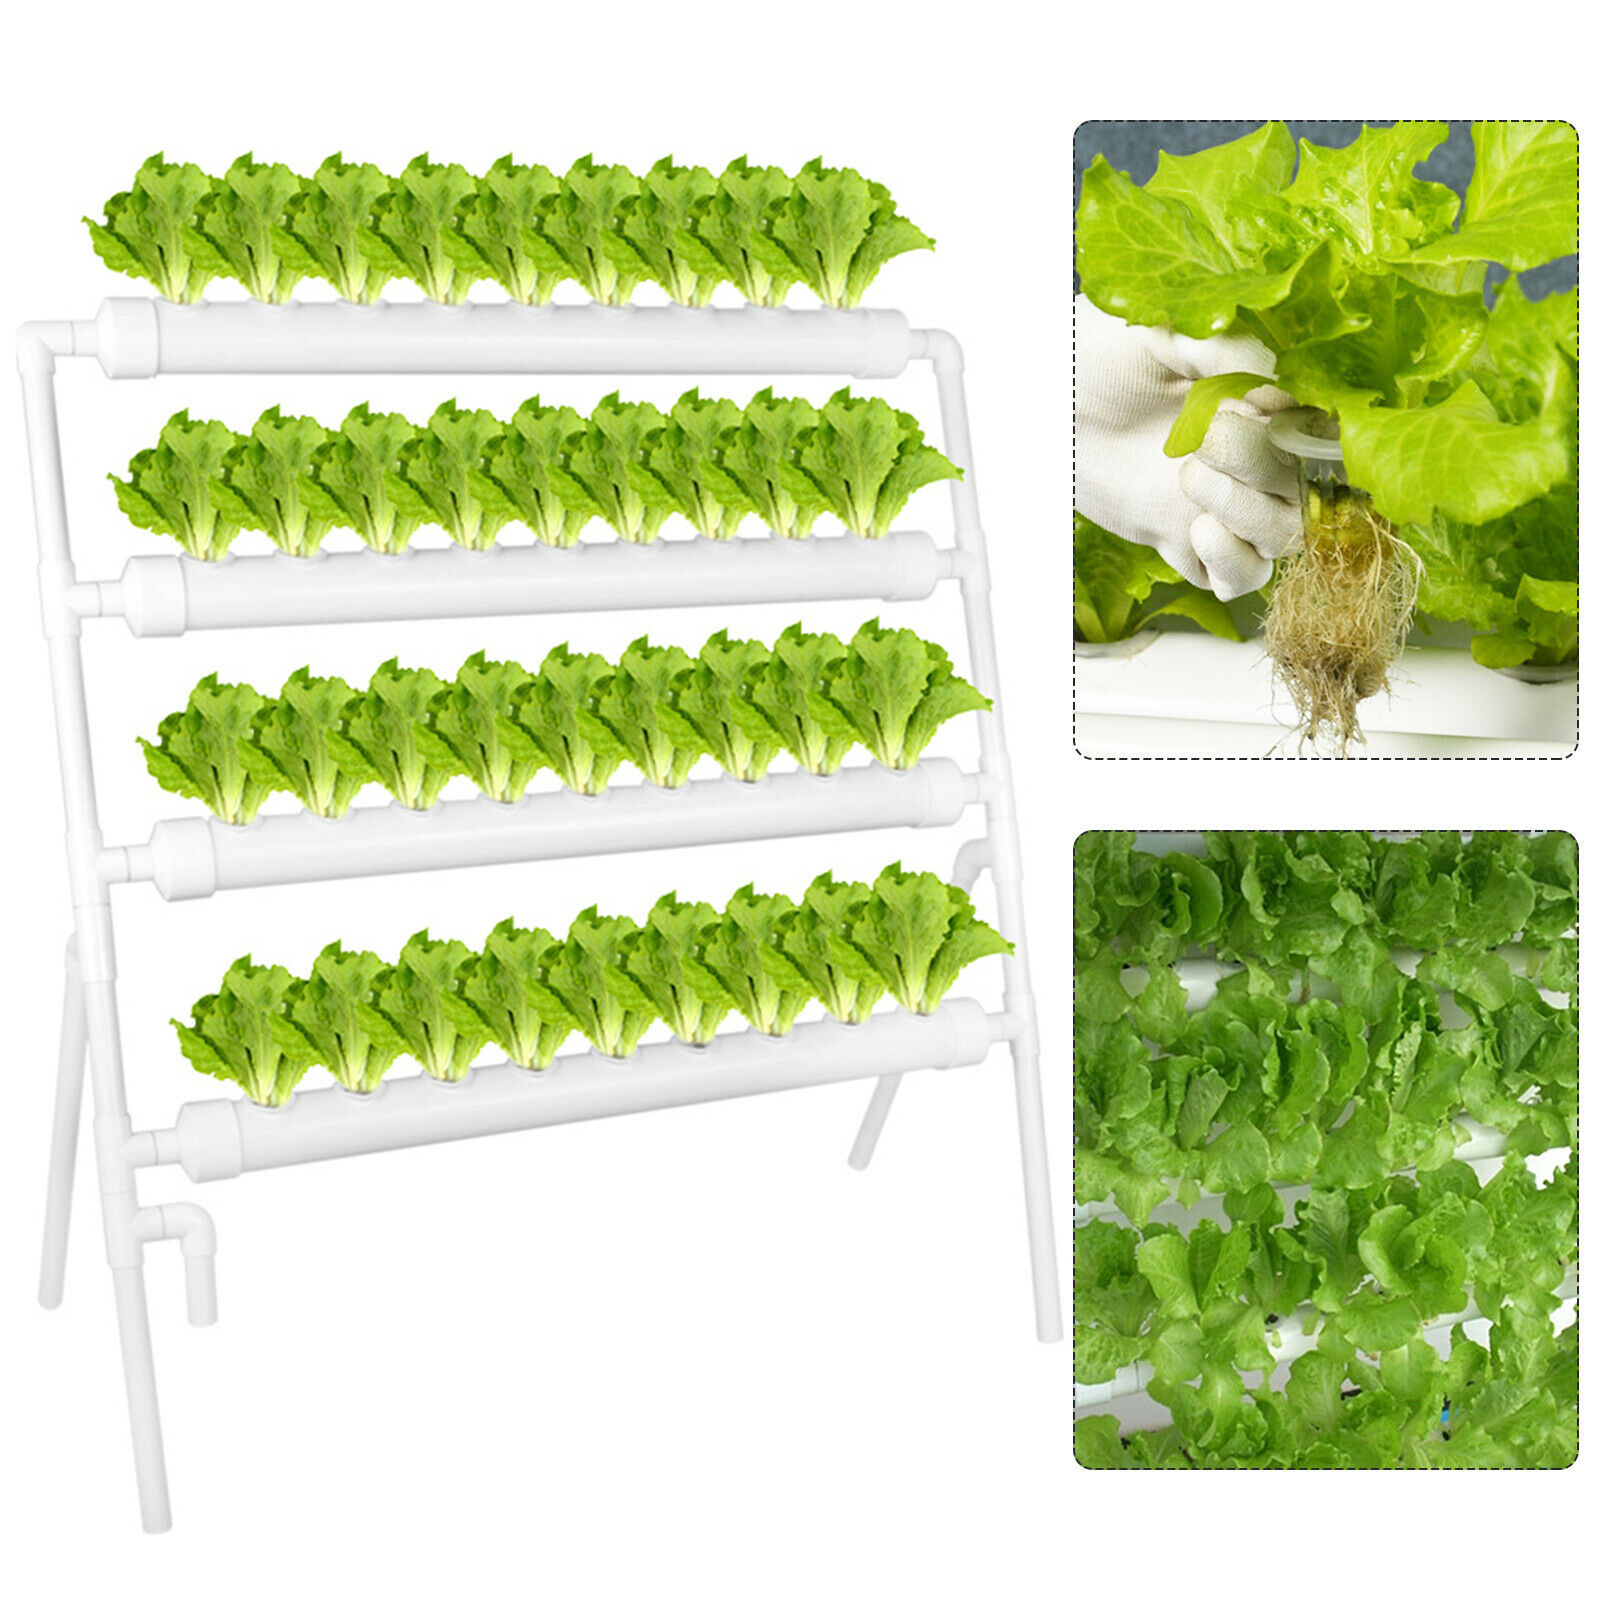 Hydroponic 36 Sites Grow Kit Plant Growing System for Leafy Vegetables 4 Layers